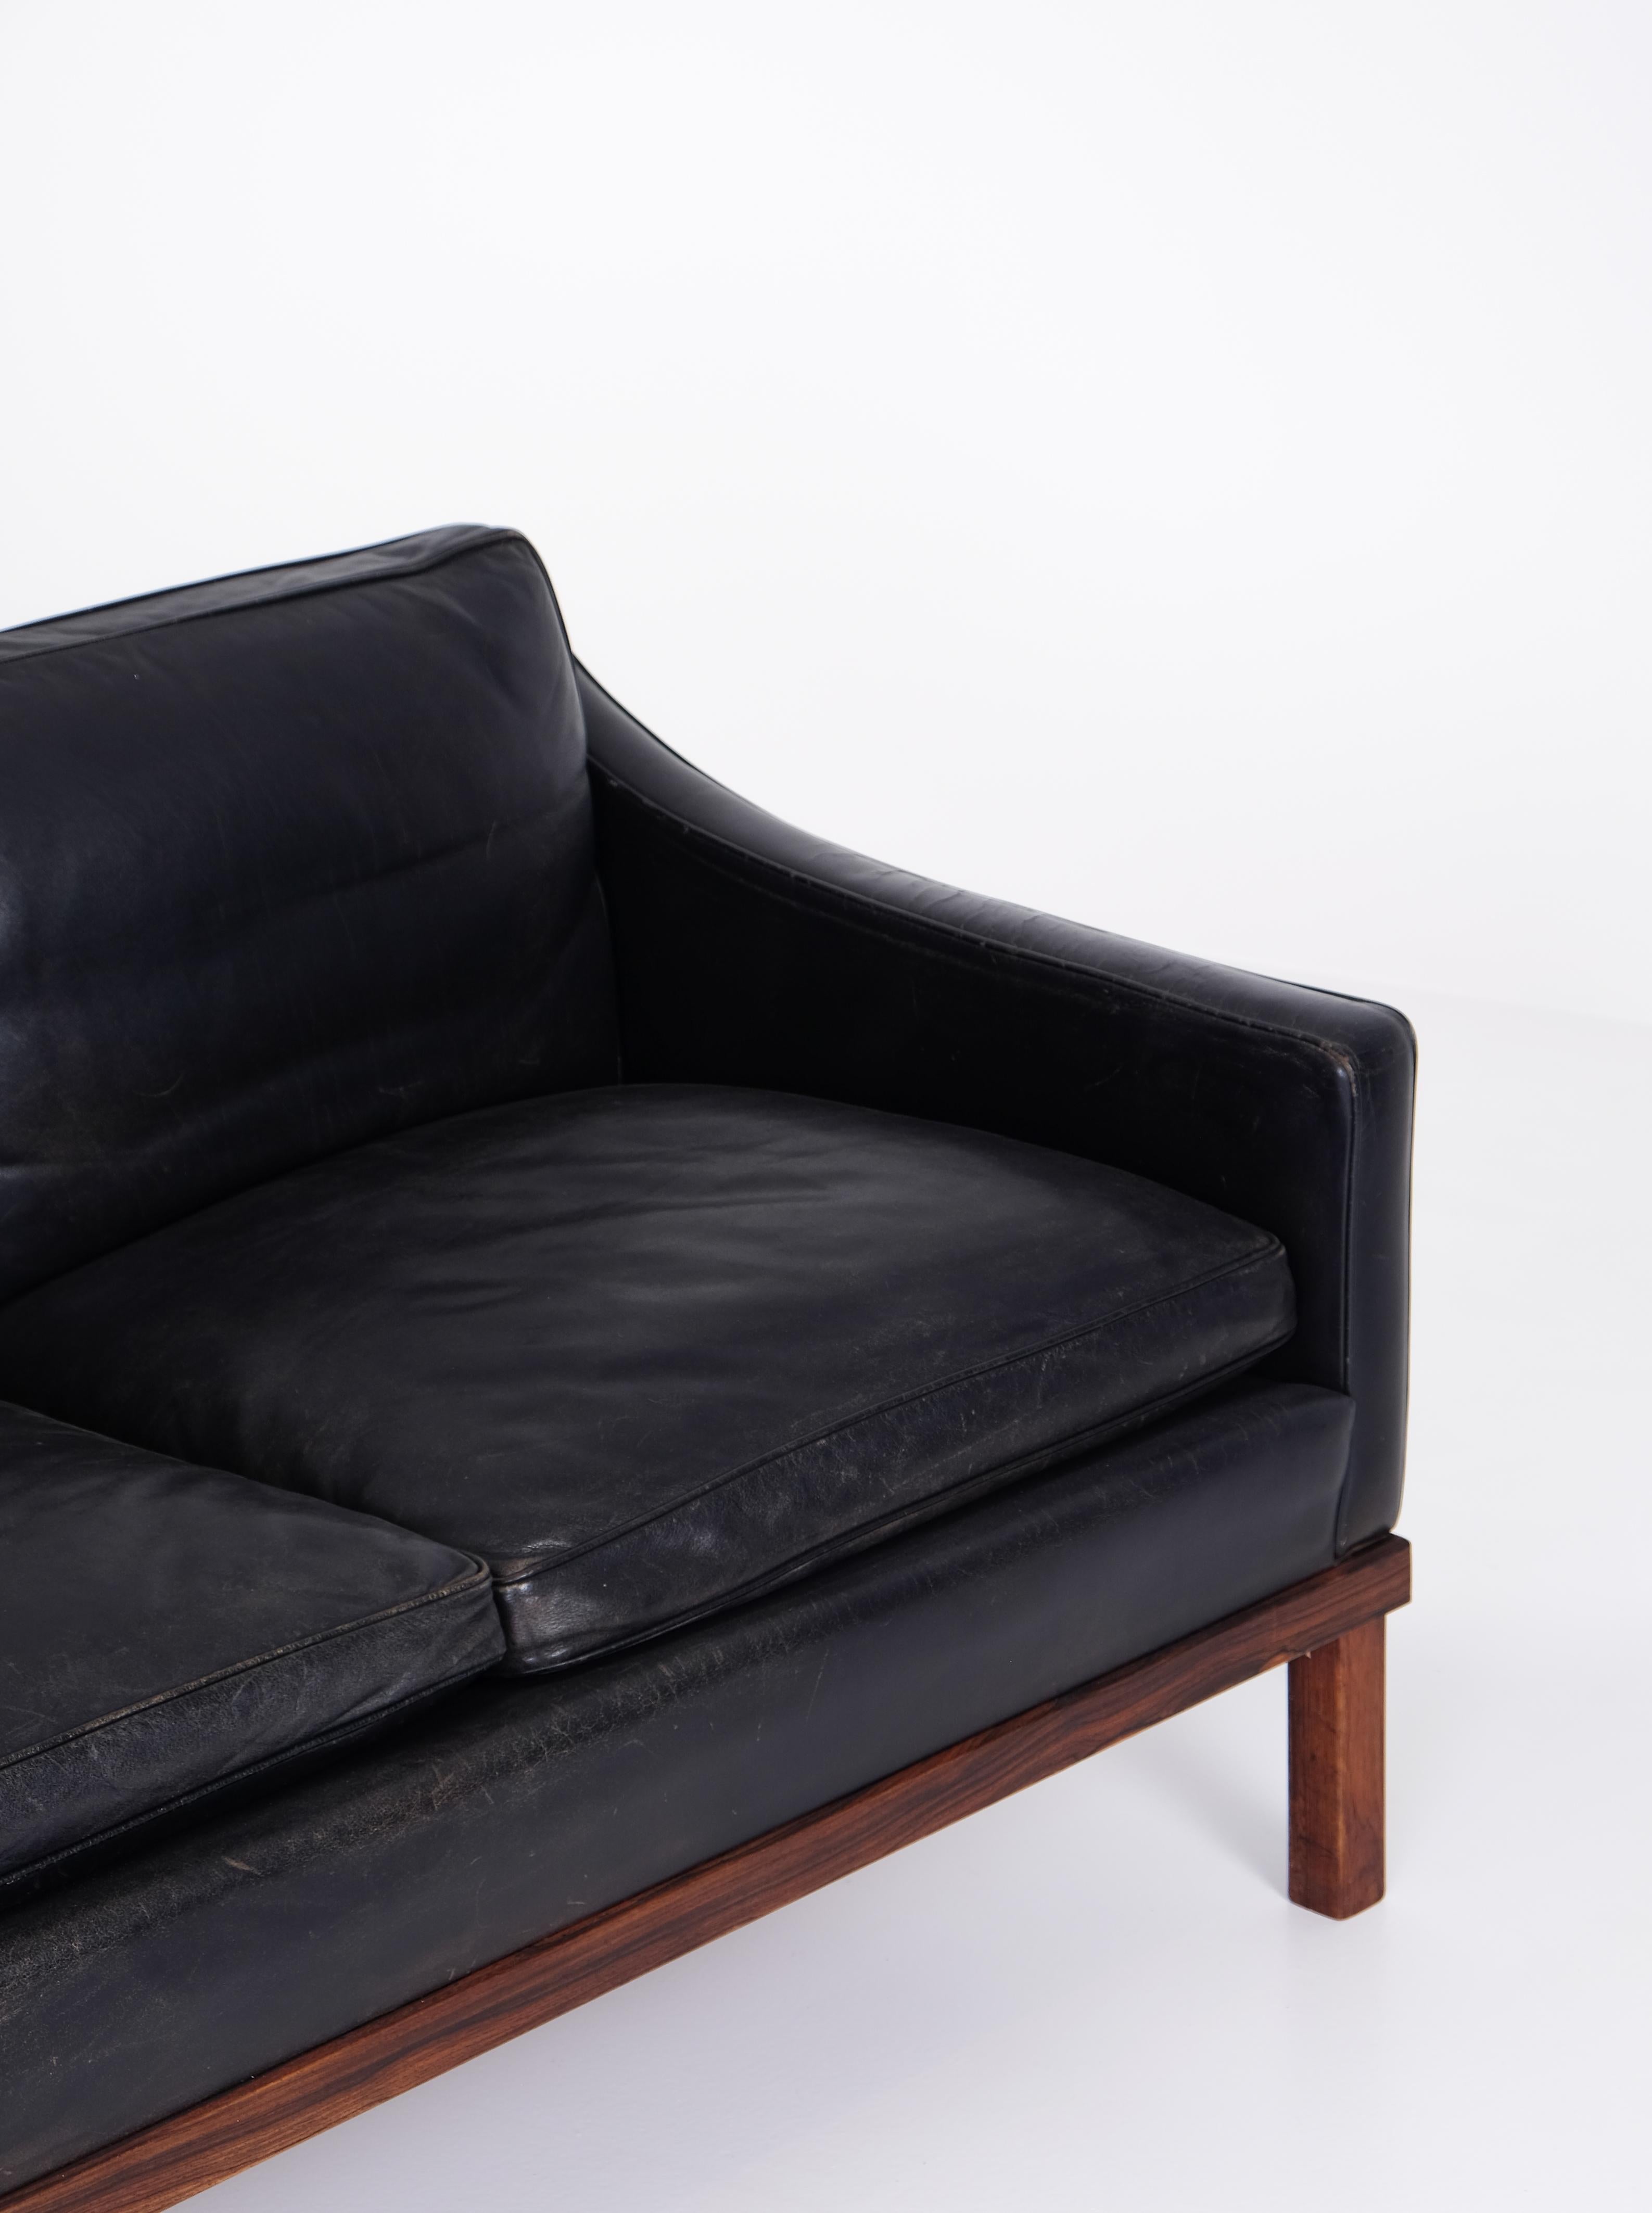 3-seater Ib Kofod Larsen sofa in original black leather, very good condition. Produced by OPE in Sweden, 1960s.
Please note: matching 4-seater sofa also available.